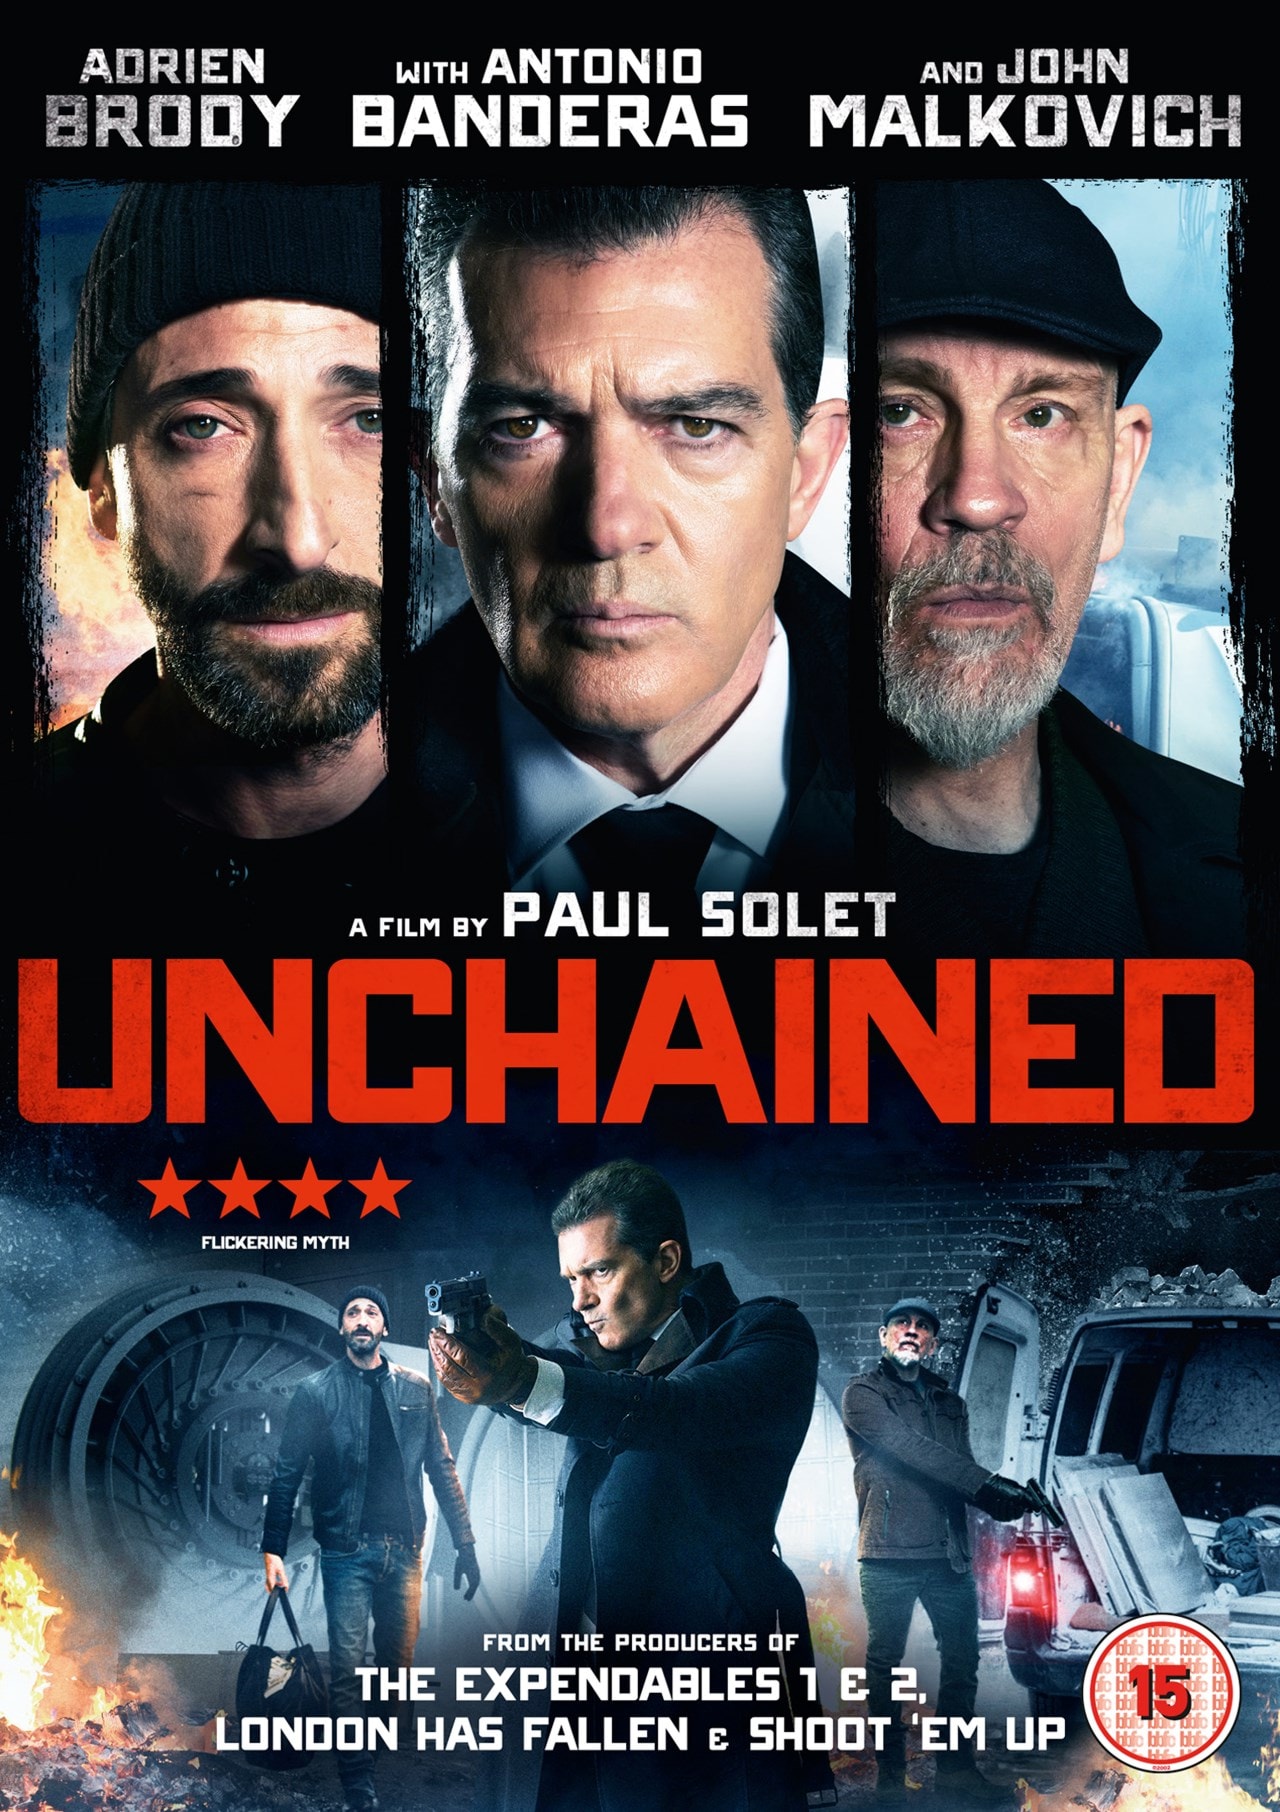 Unchained | DVD | Free shipping over £20 | HMV Store